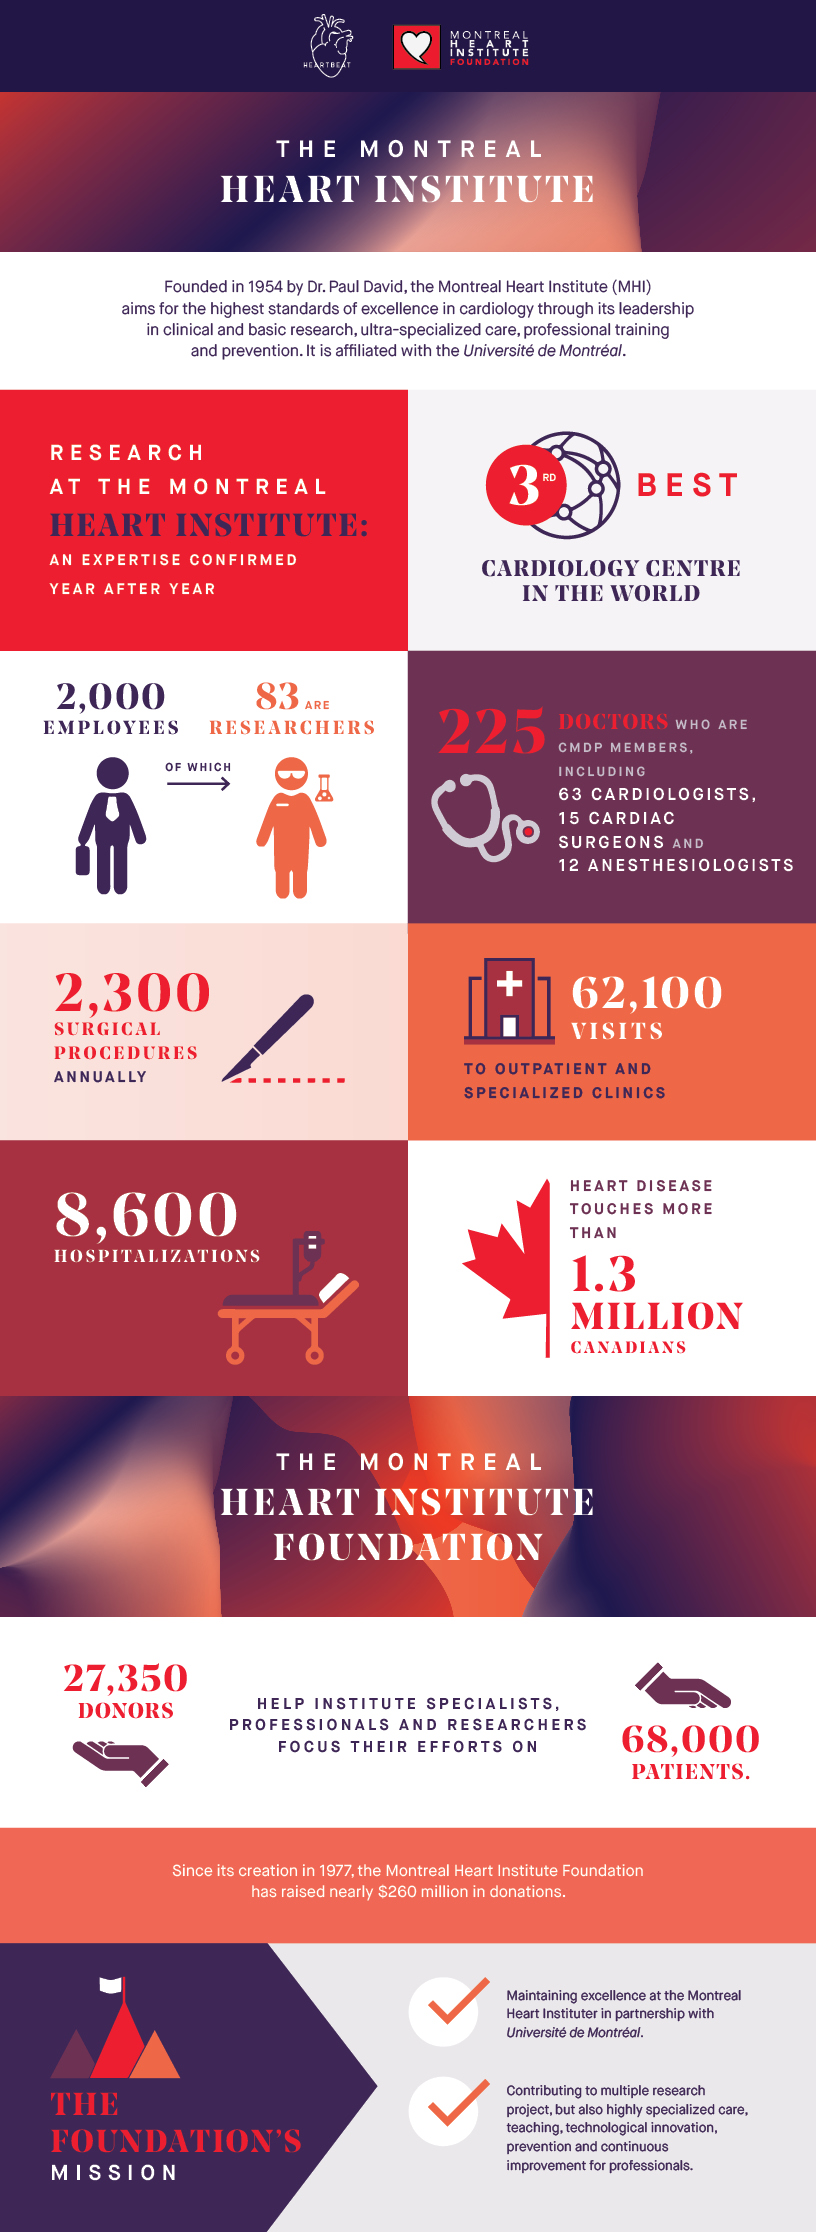 Research at the Montreal Heart Institute